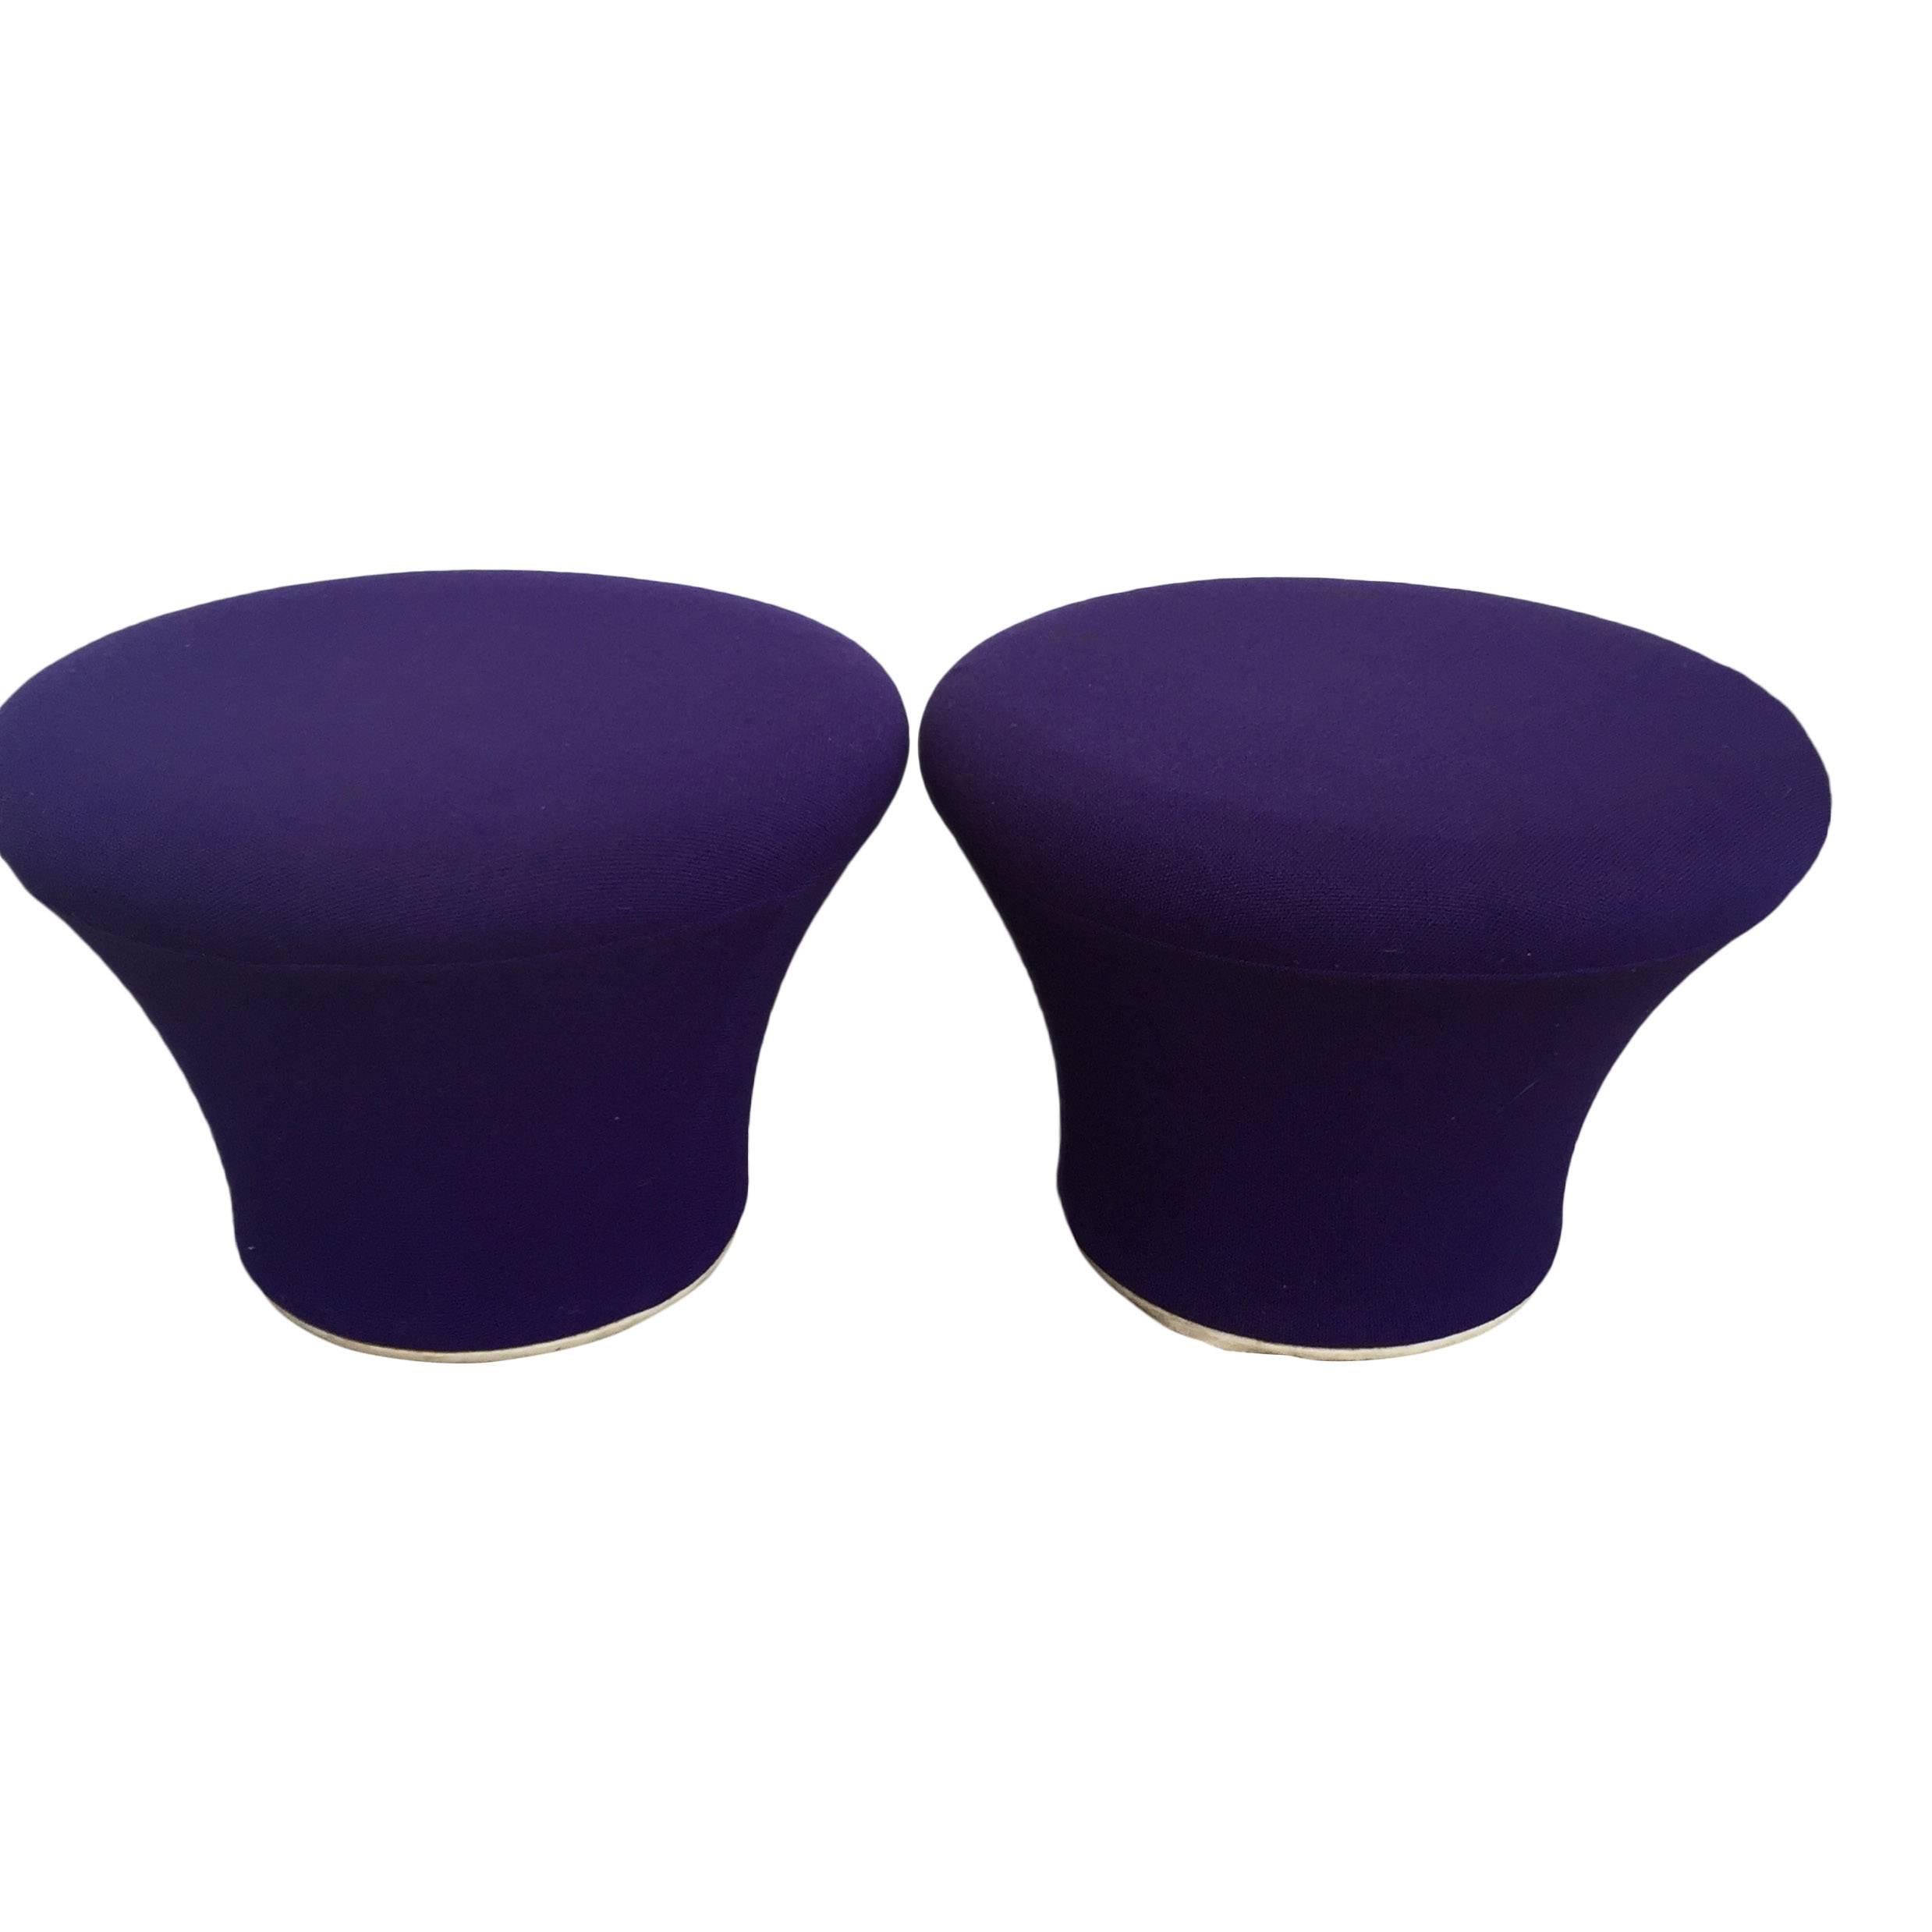 Up for sale is a nice pair of Pierre Paulin for Artifort stools in original condition.

The stools are comfortable for seating, but can also be used as ottomans or decorative poofs. 

The stools are characteristic of Paulin's bright and humorous